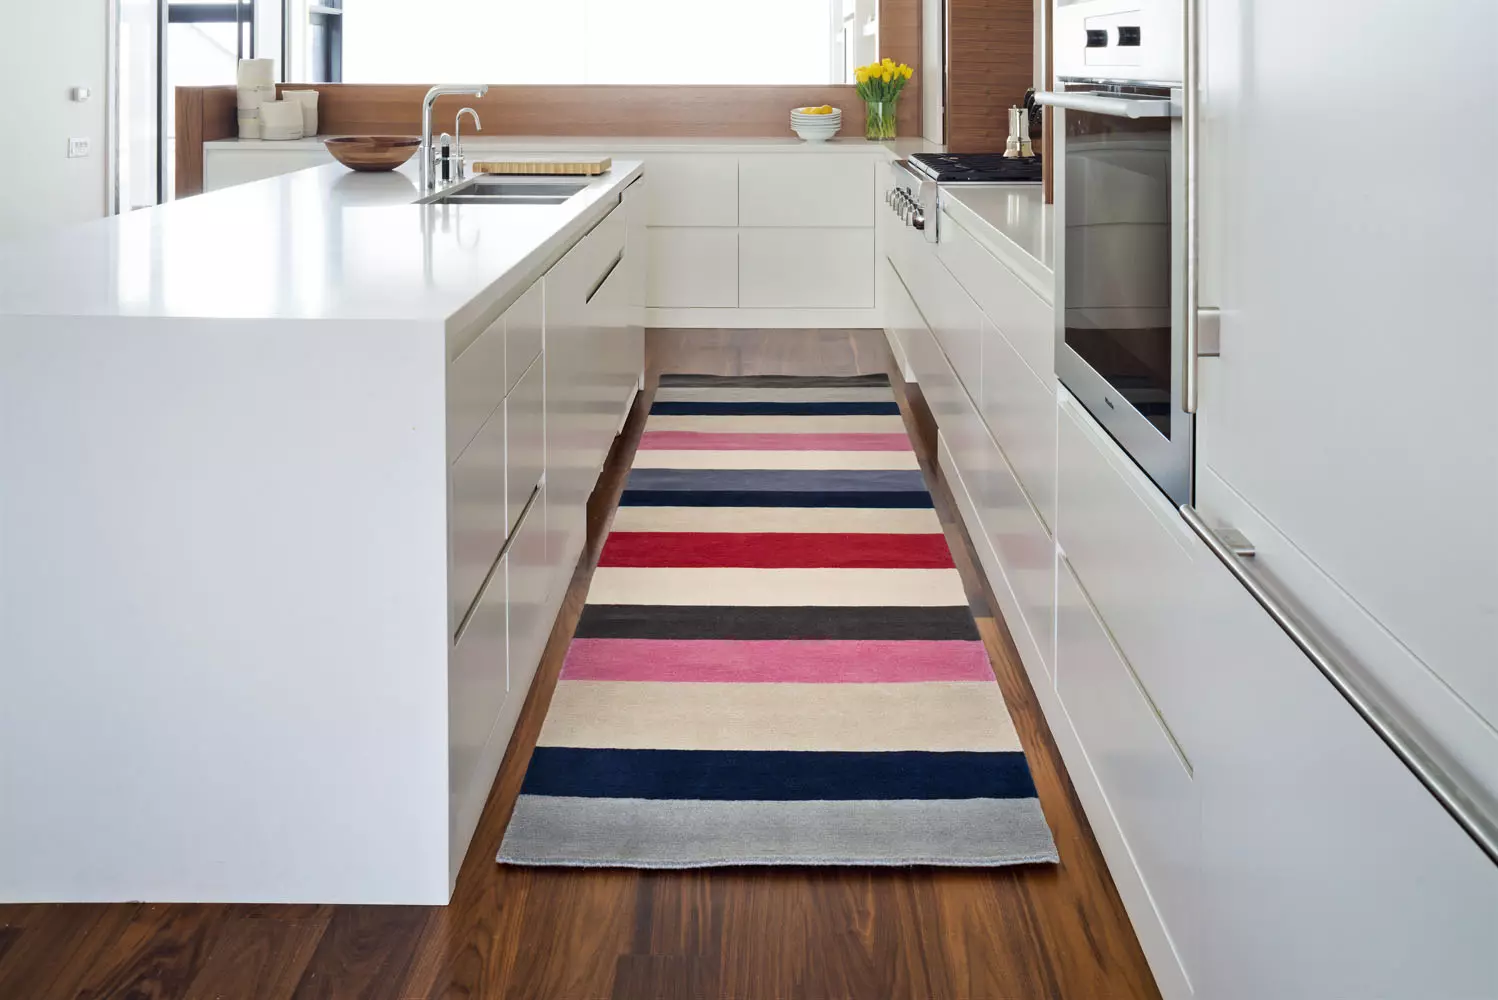 Choice of carpet in the kitchen